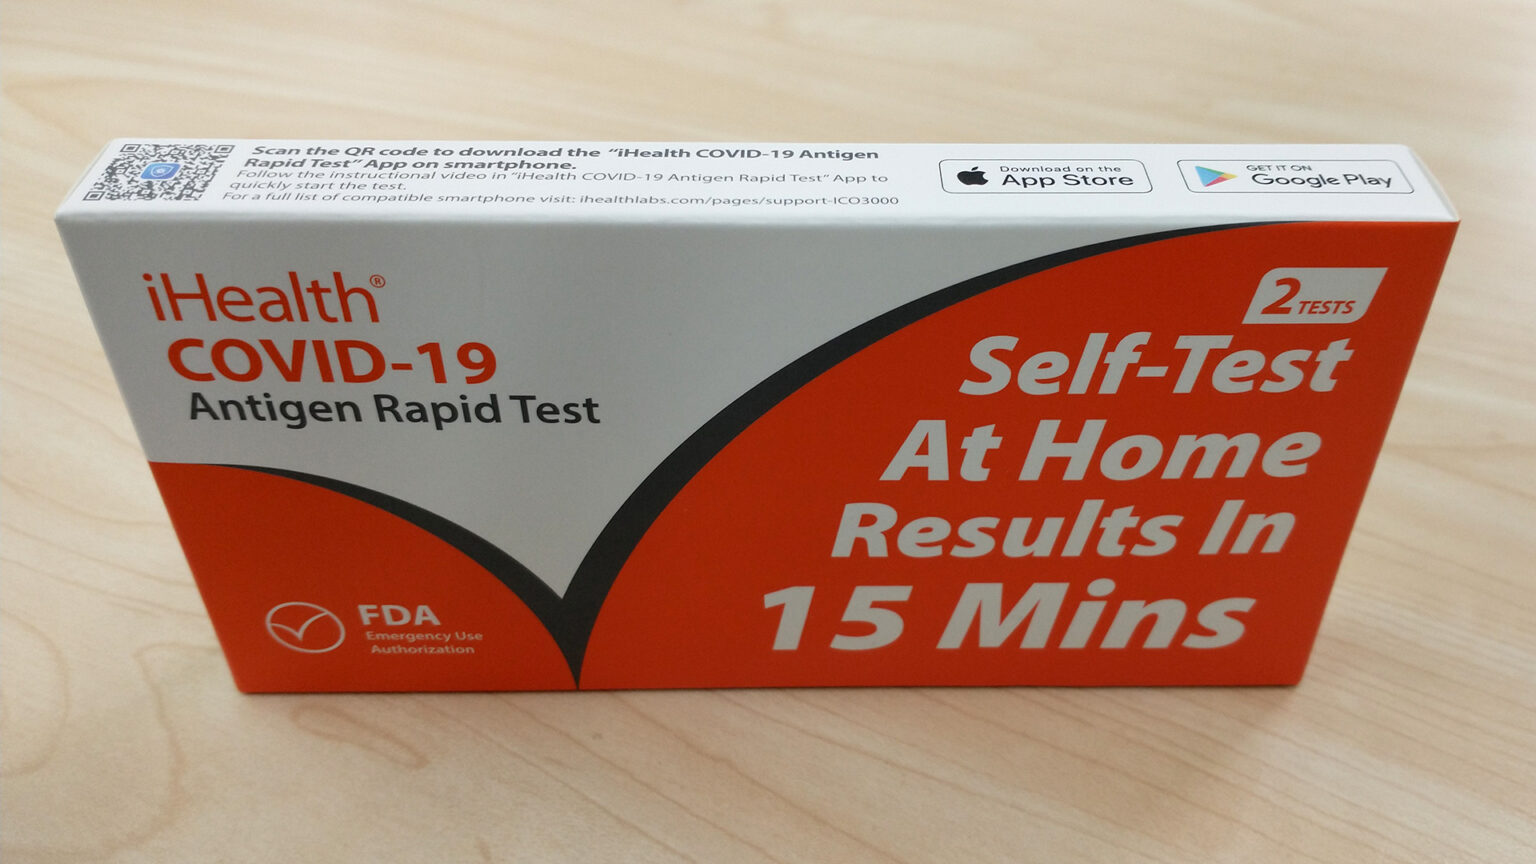 An iHealth COVID-19 Antigen Rapid Test box with packaging that reads Self-Test At Home Results in 15 Mins sits on a table.